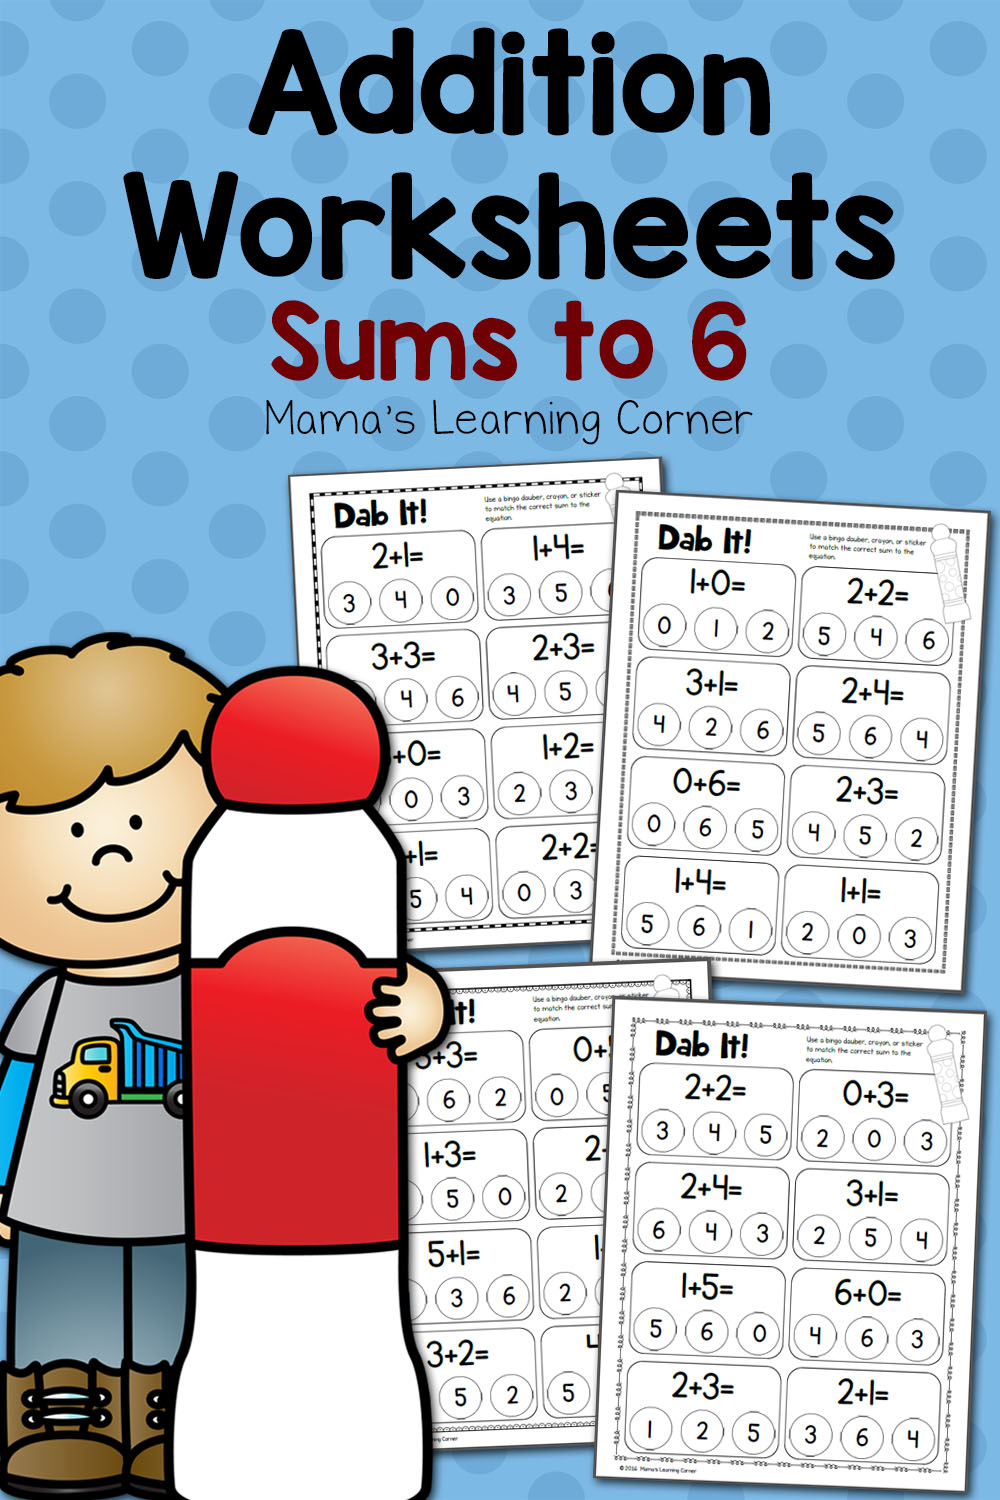 Dab It! Addition Worksheets Sums to 6 Mamas Learning